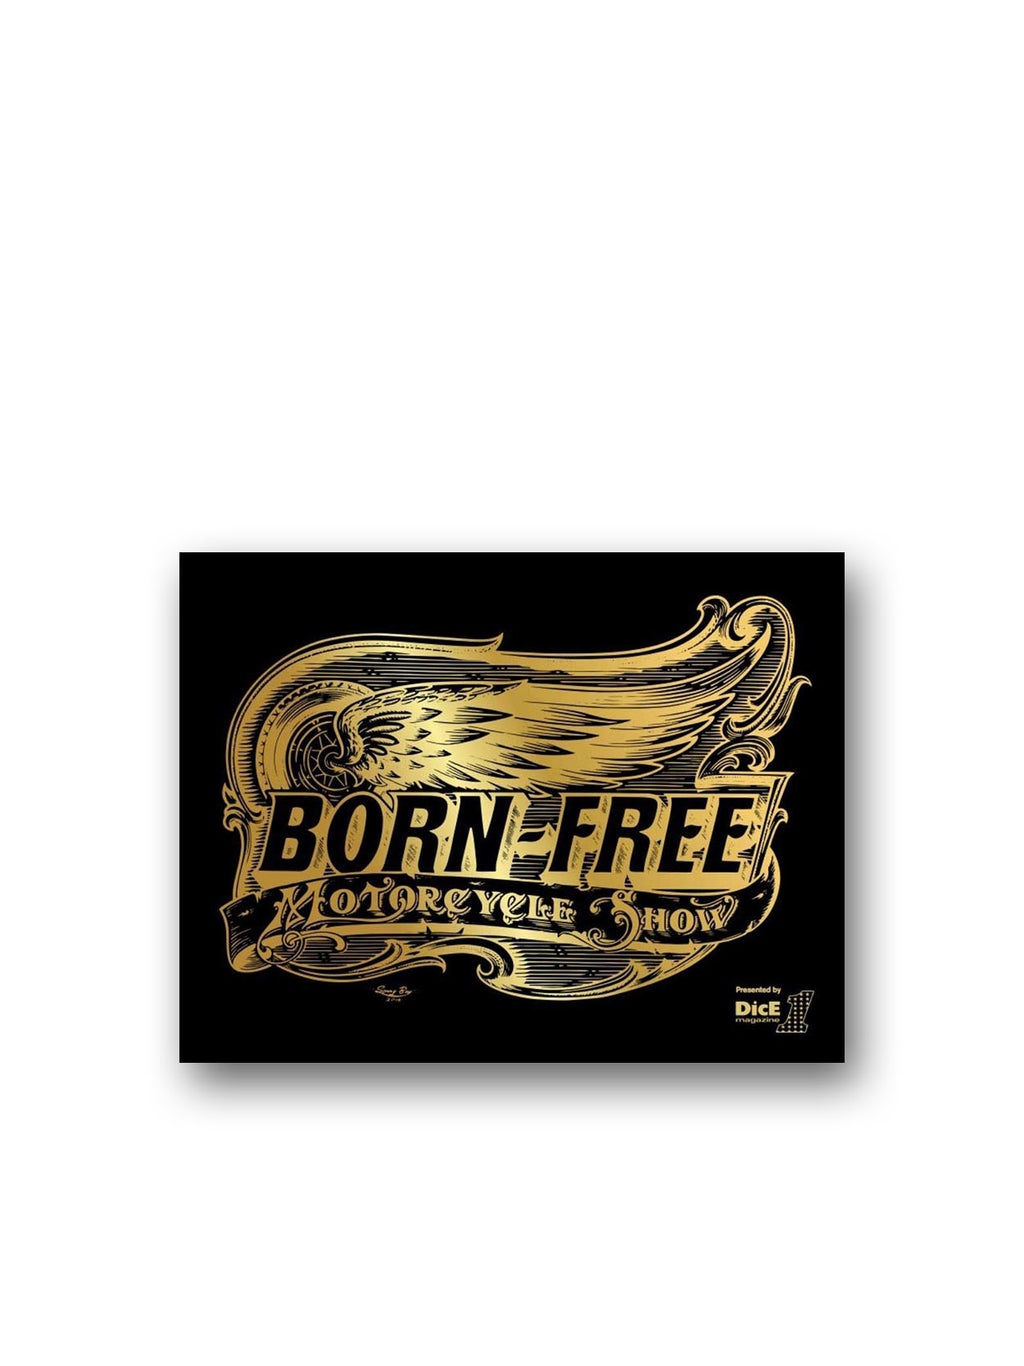 Born-Free : Motorcycle Show